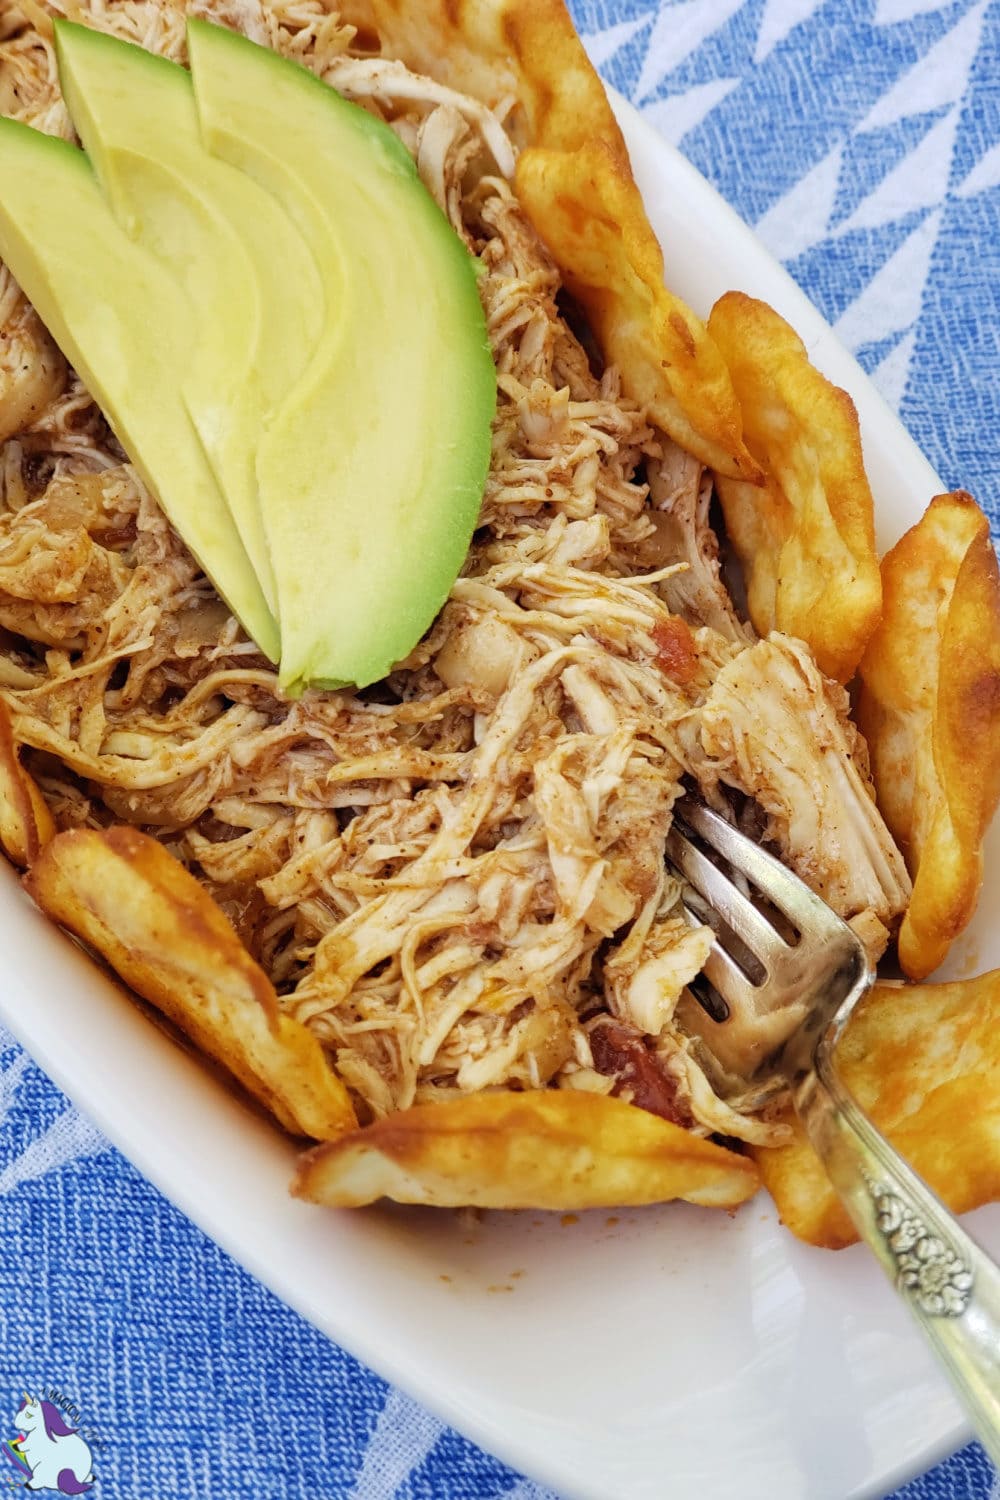 Pulled chicken with avocado and RITZ Crisp and Thins.